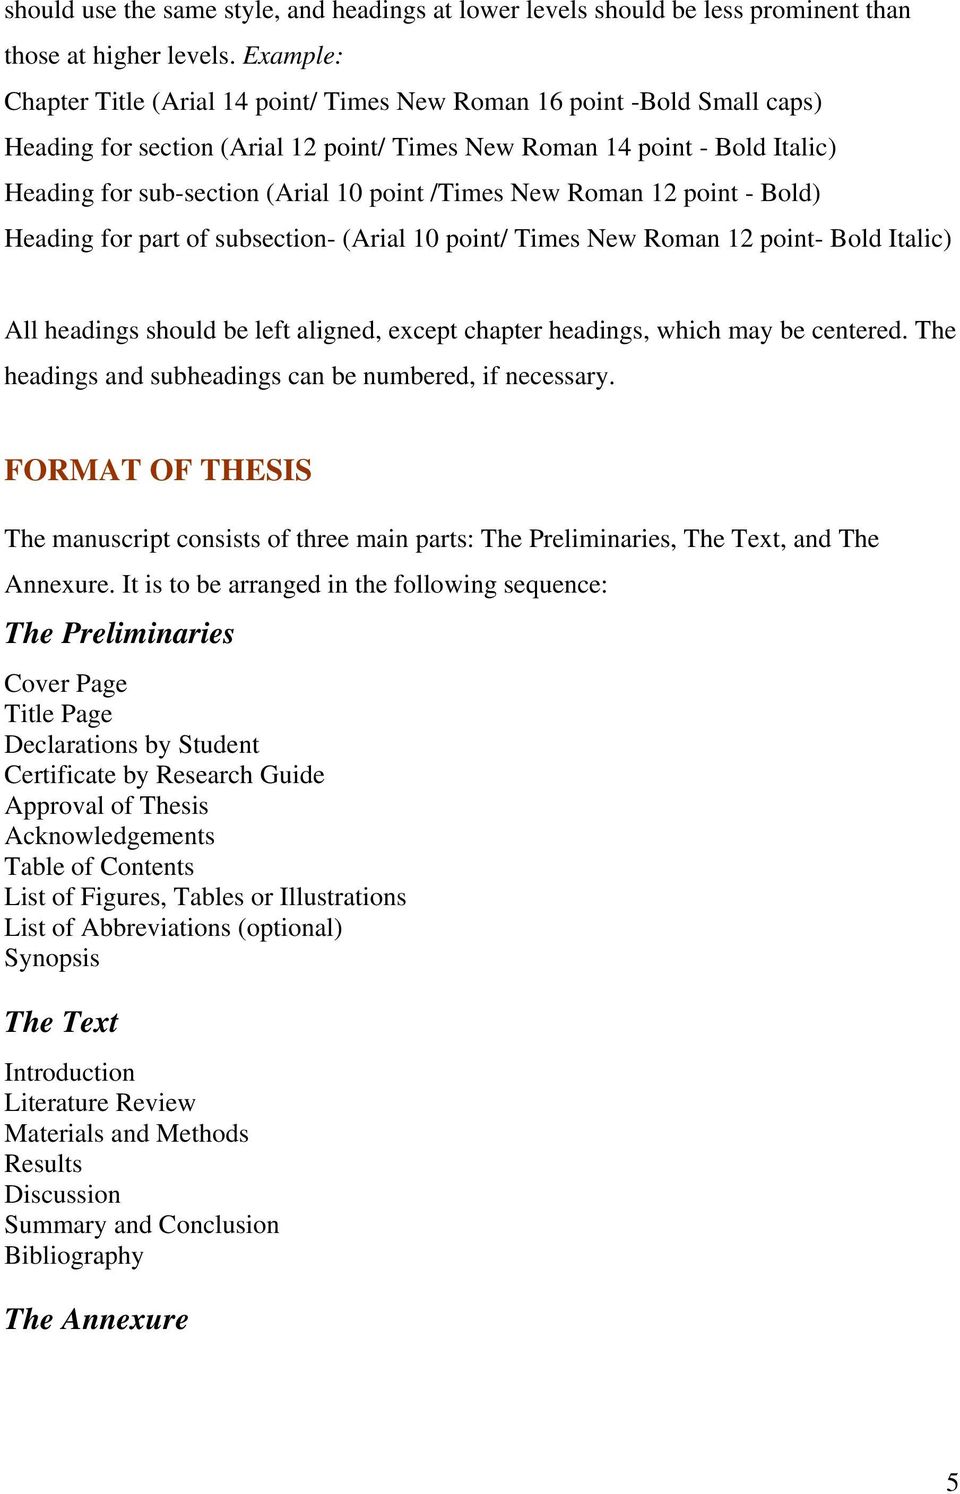 GUIDELINES FOR PREPARATION AND SUBMISSION OF PhD THESIS - PDF Free